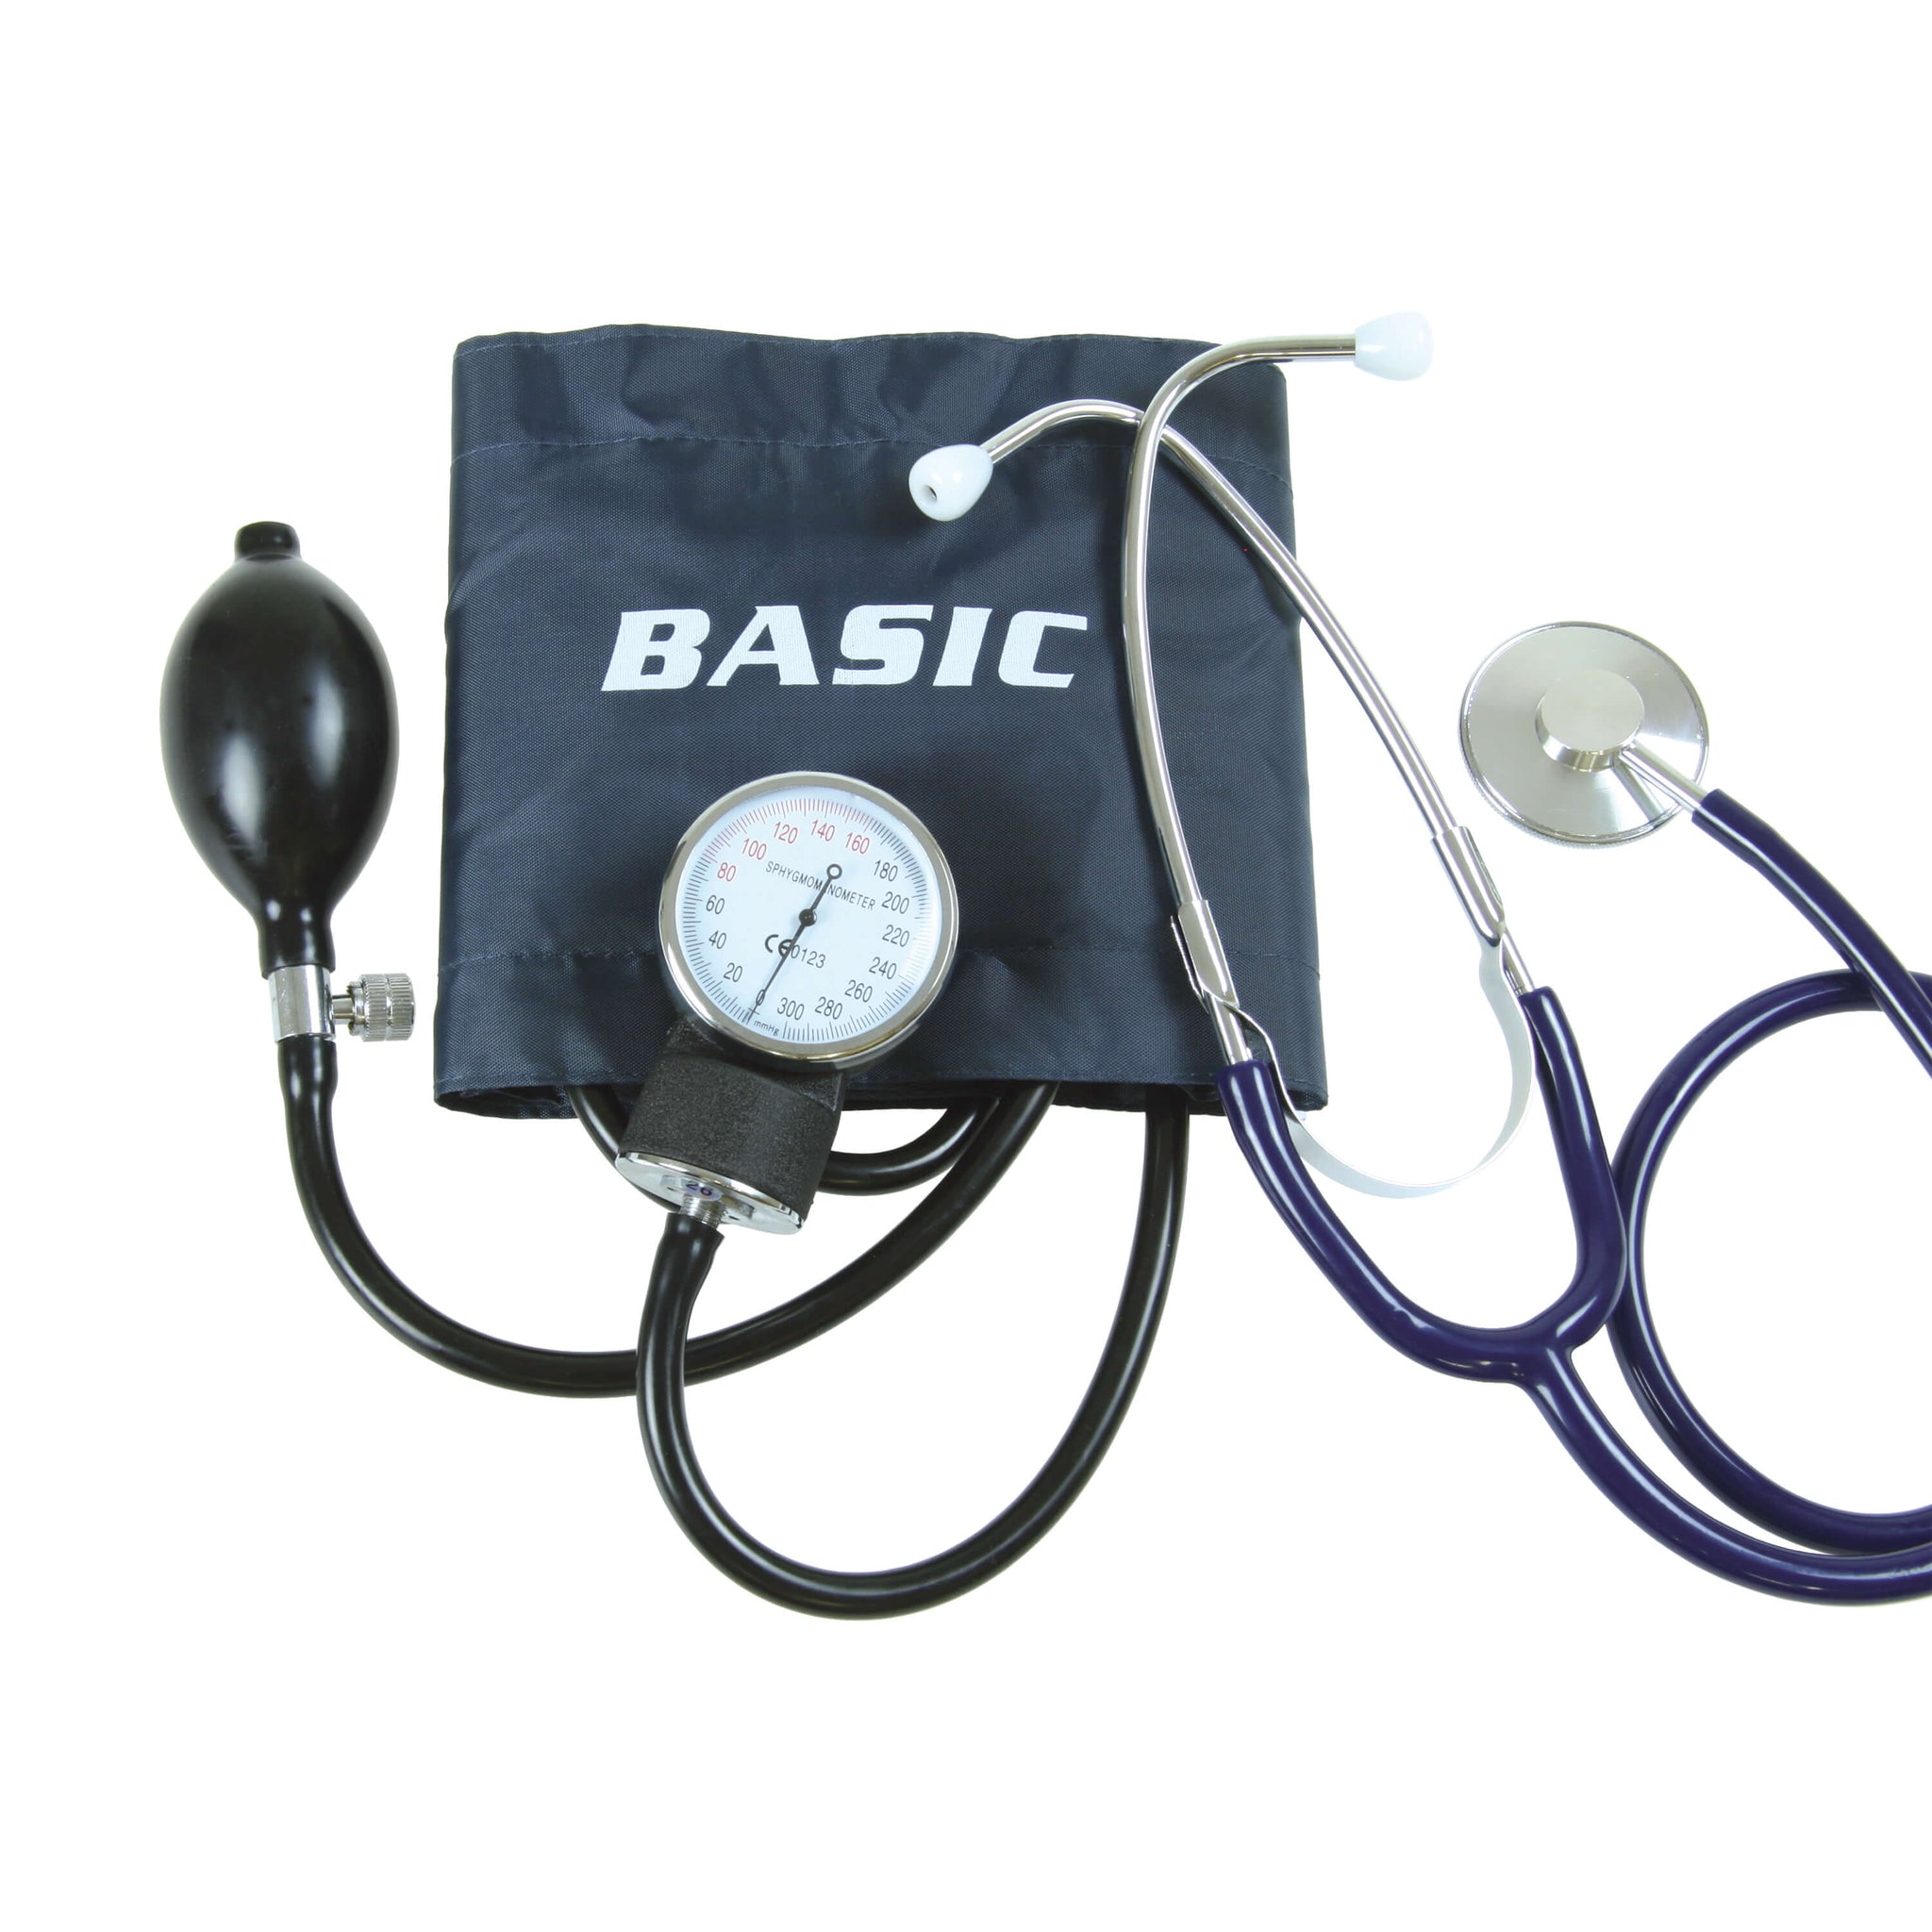 Basic Two Hand Aneroid Sphygmomanometer with Stethoscope